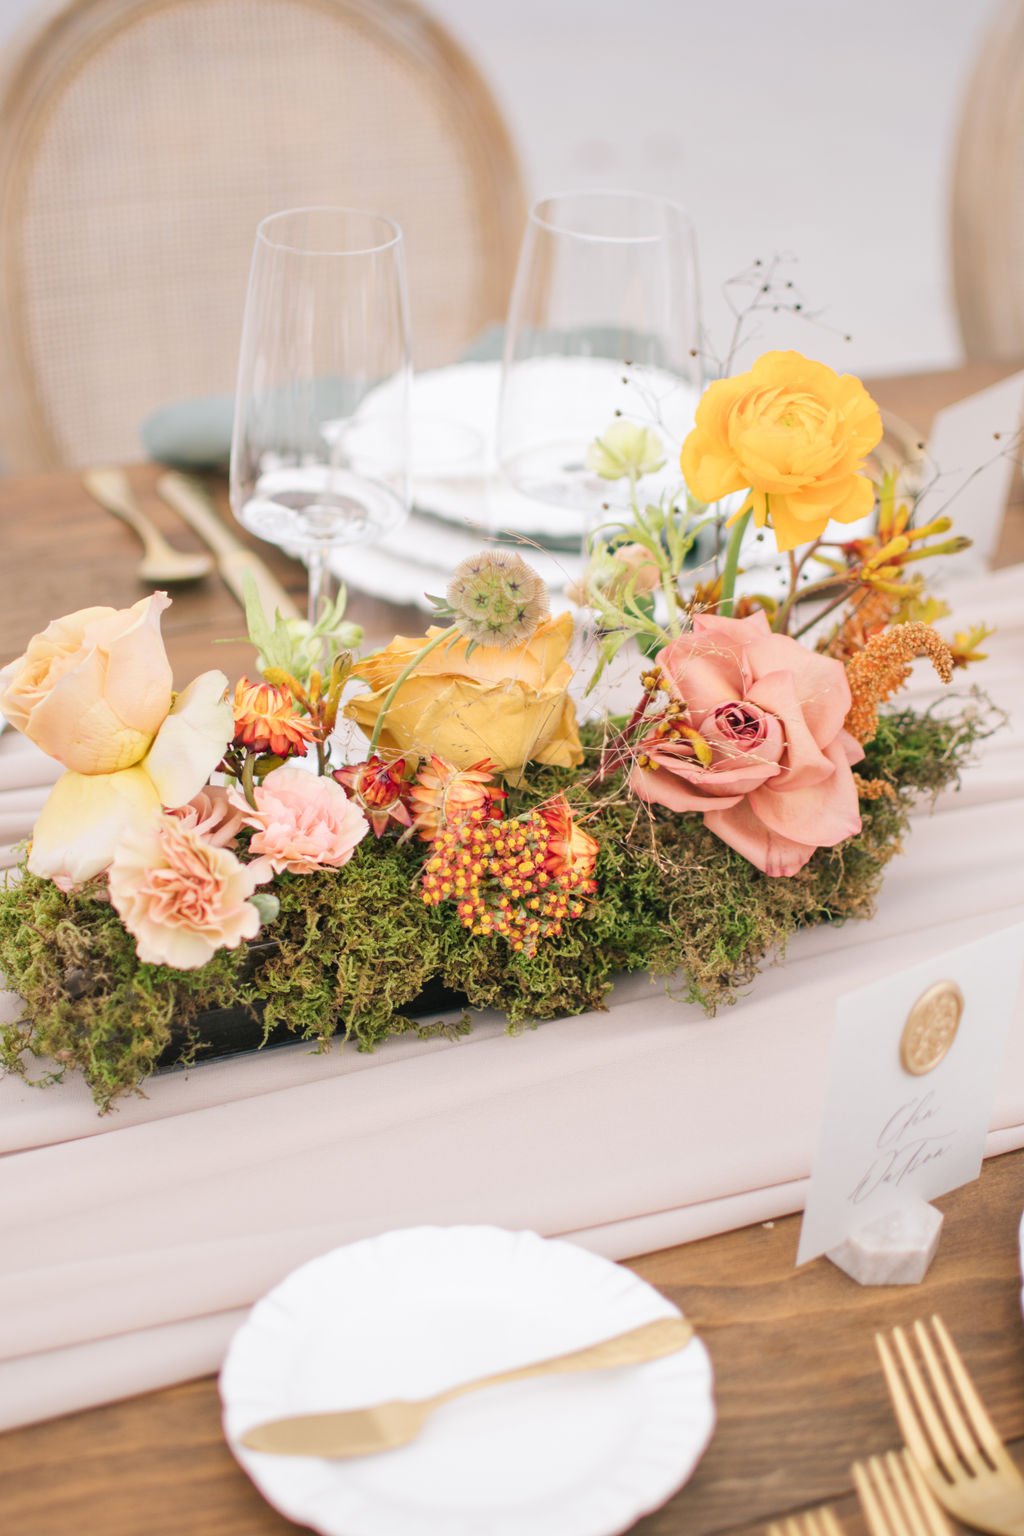 Floral meadows centred down the harvest tables on taupe chiffon table runners.